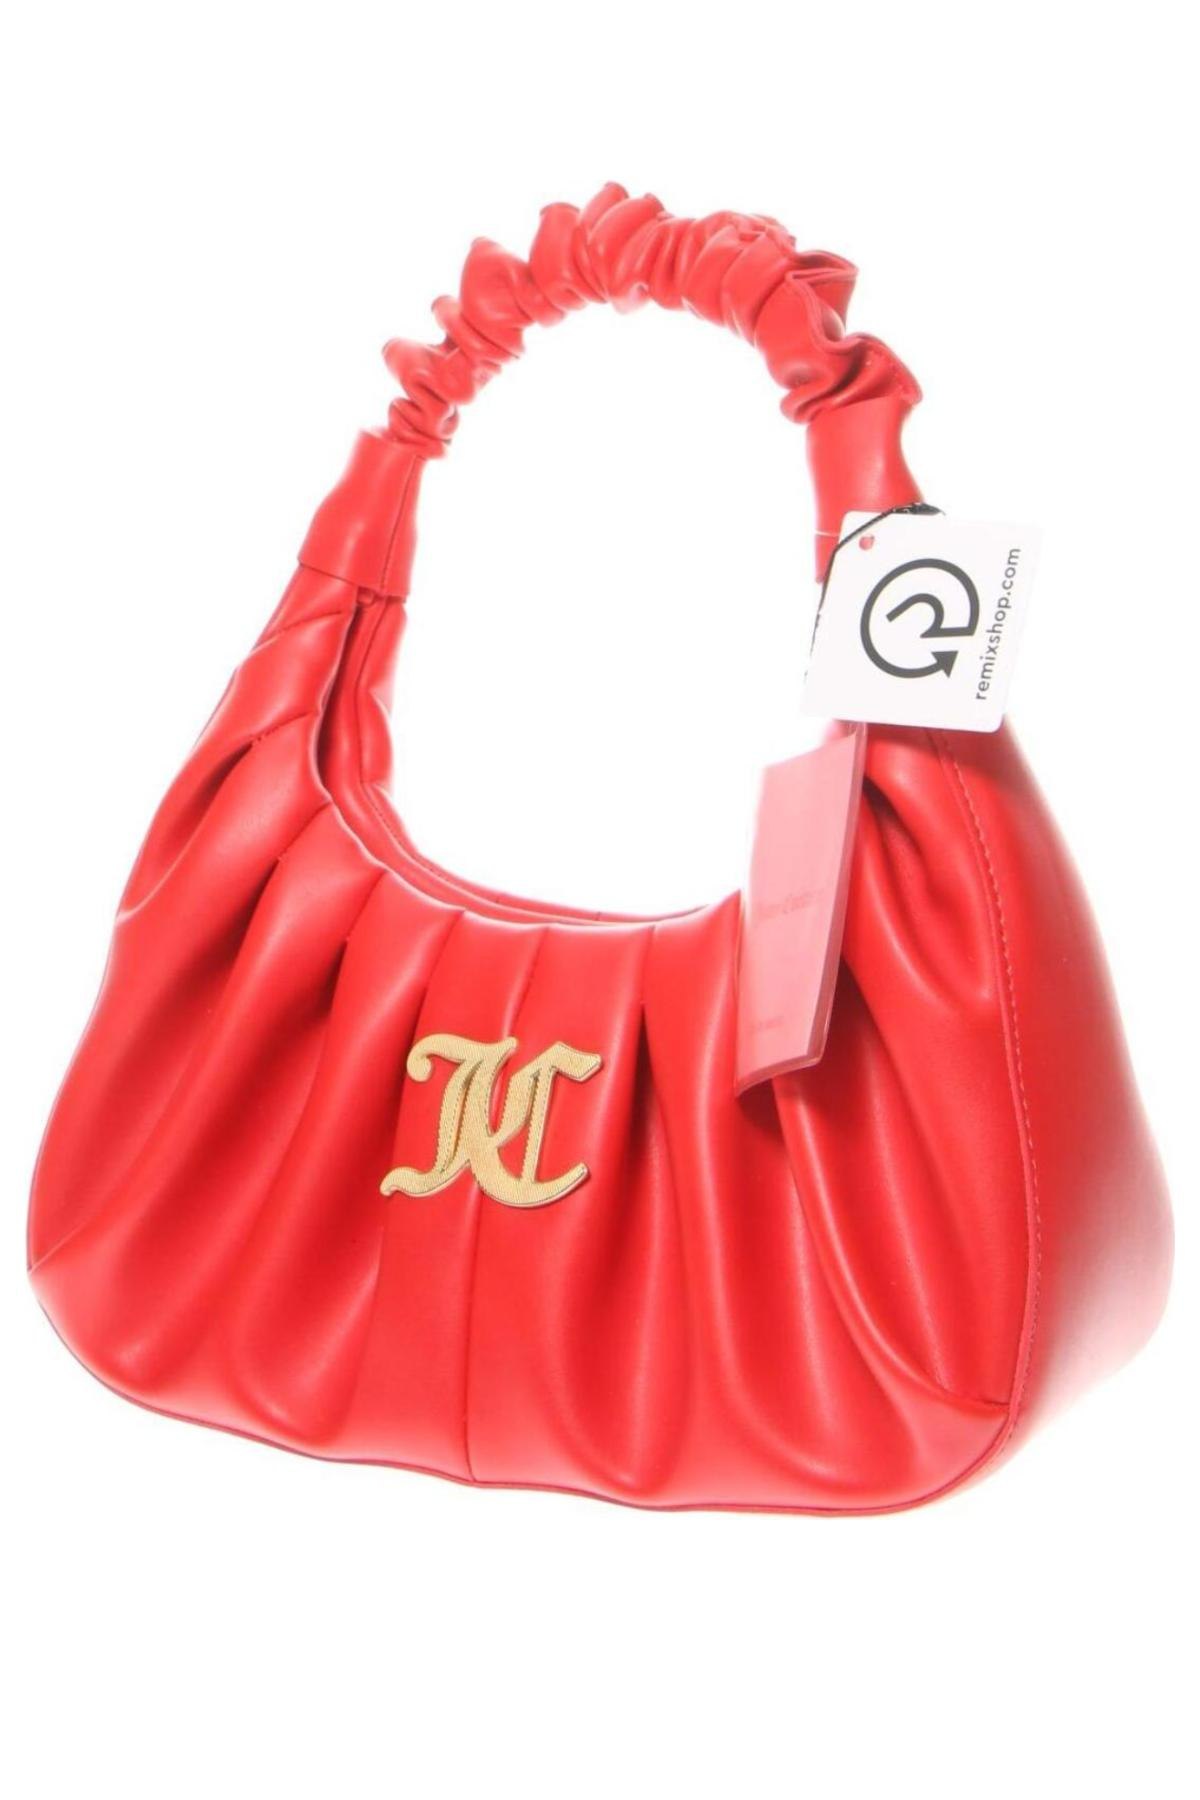 Damentasche Juicy Couture, Farbe Rot, Preis € 75,26